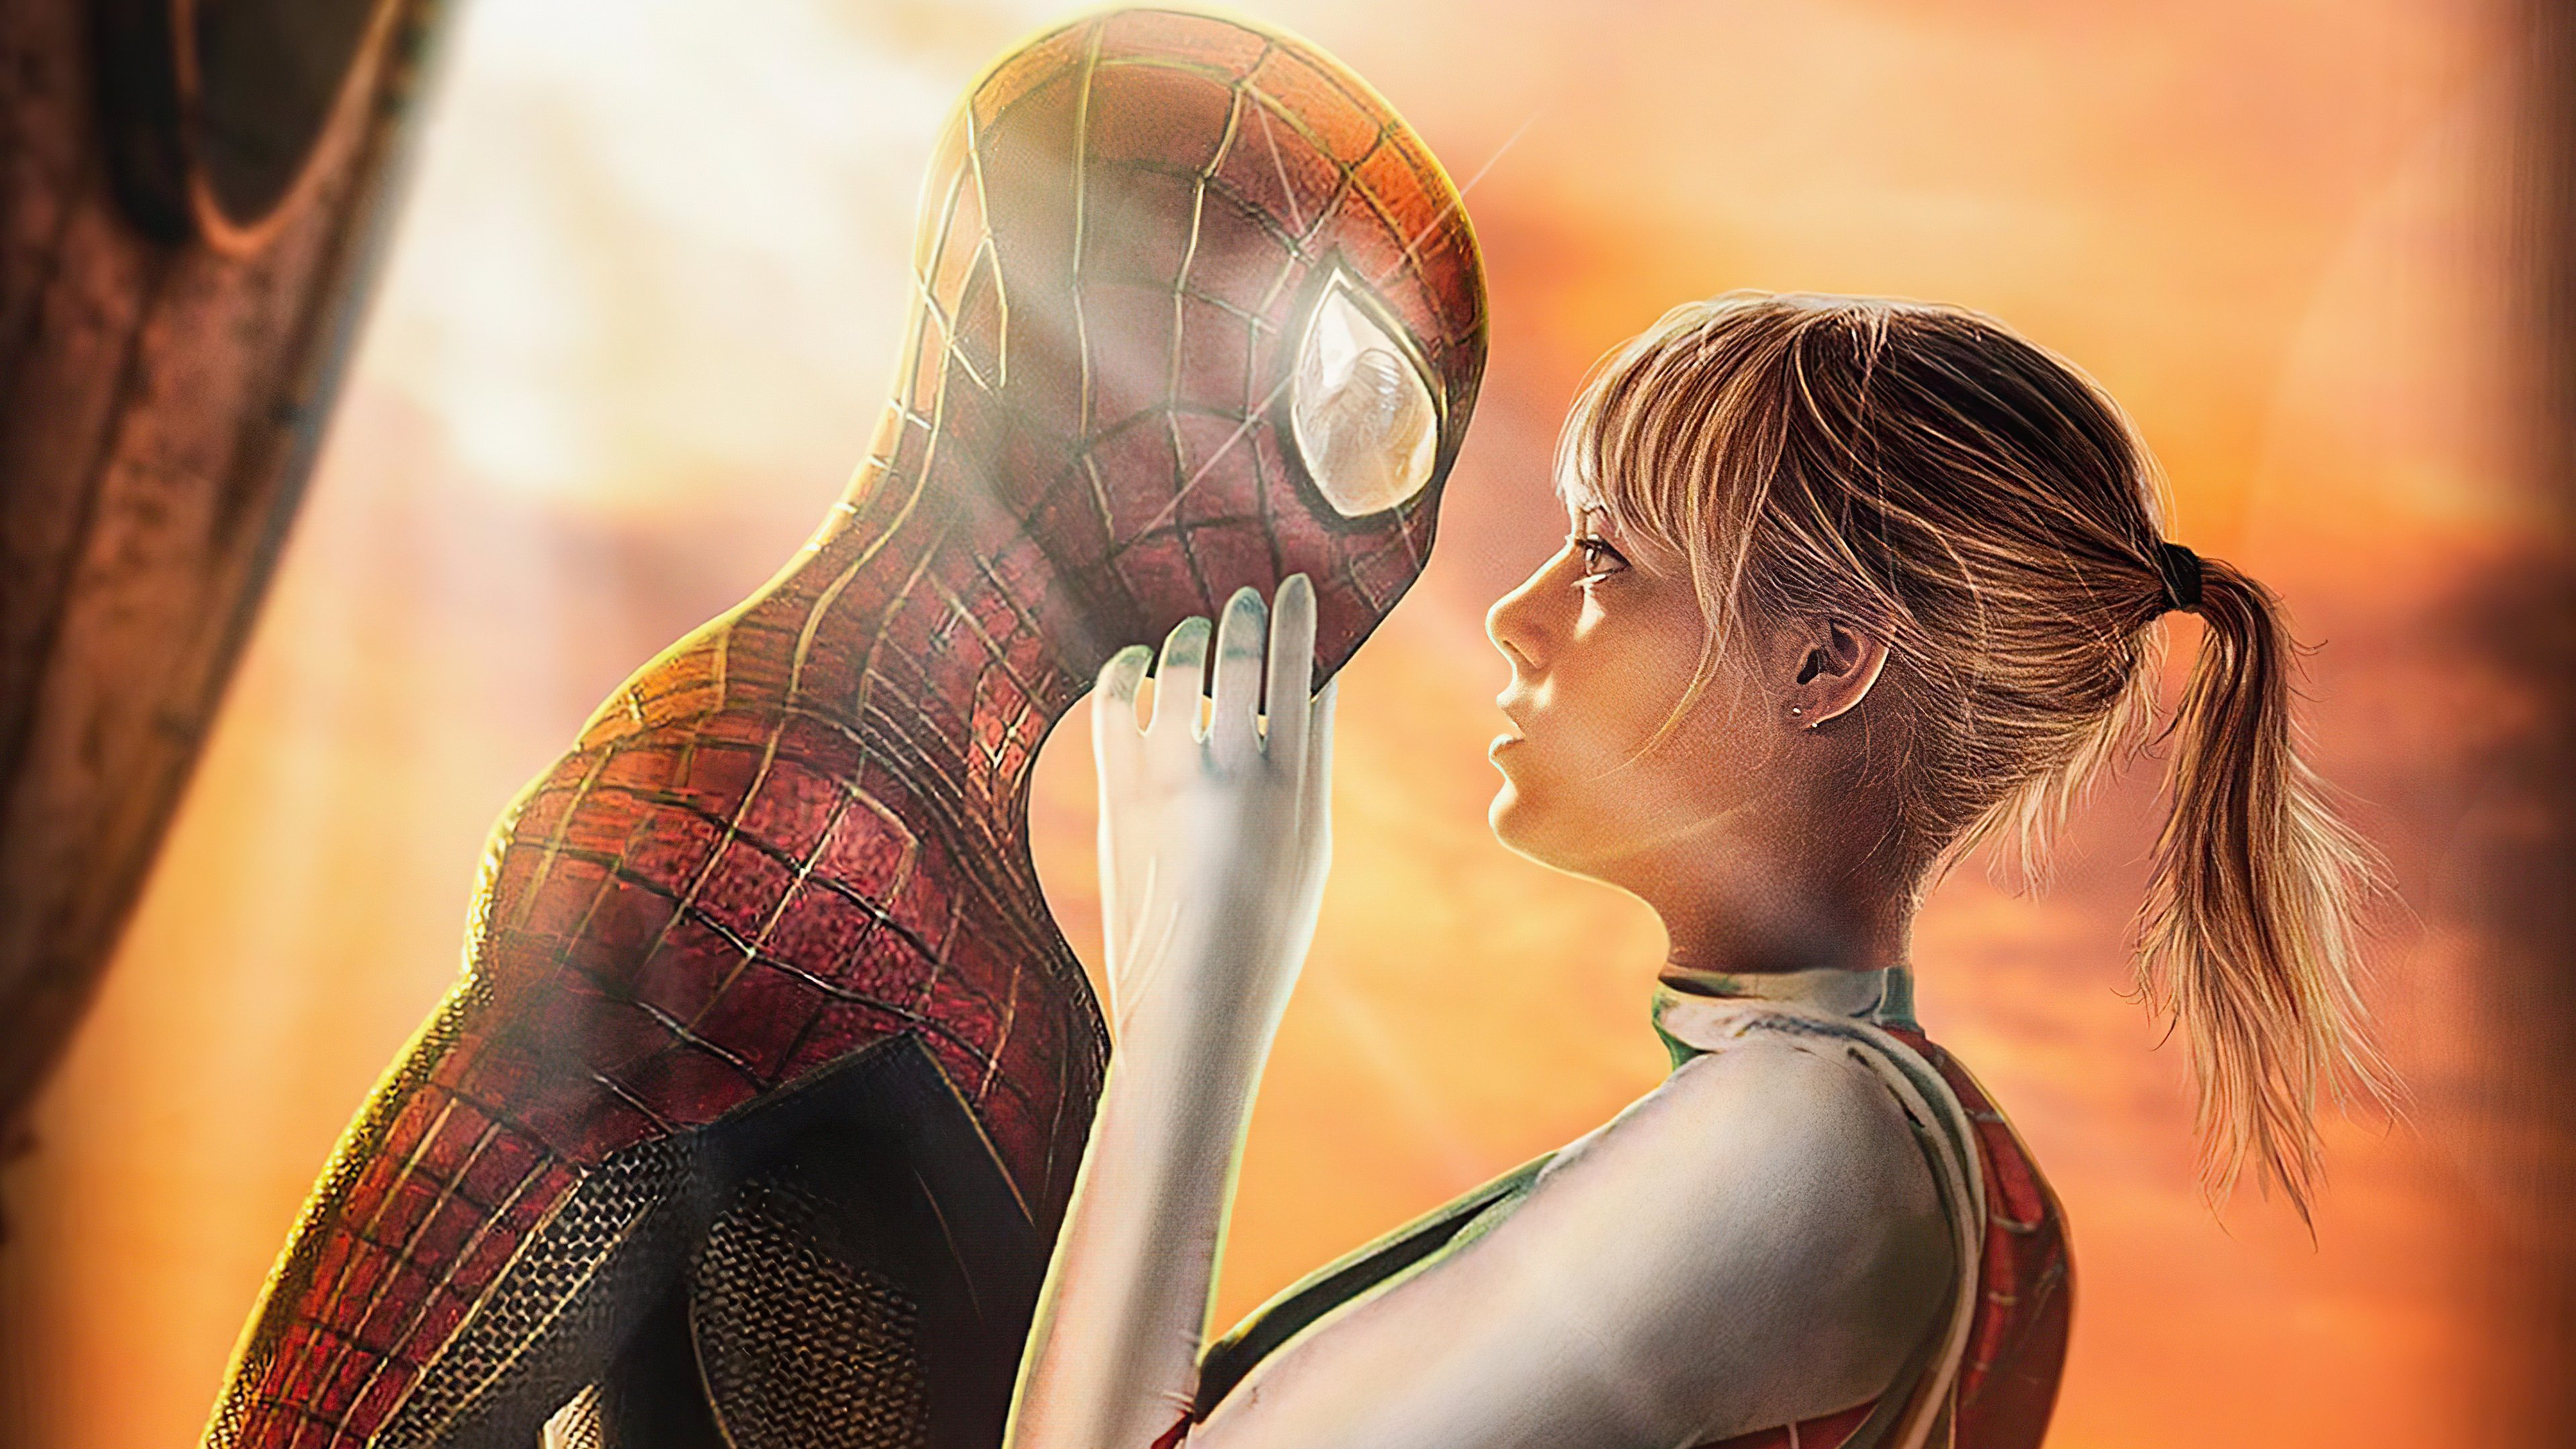 Wallpaper Spider Man and Gwen Stacy